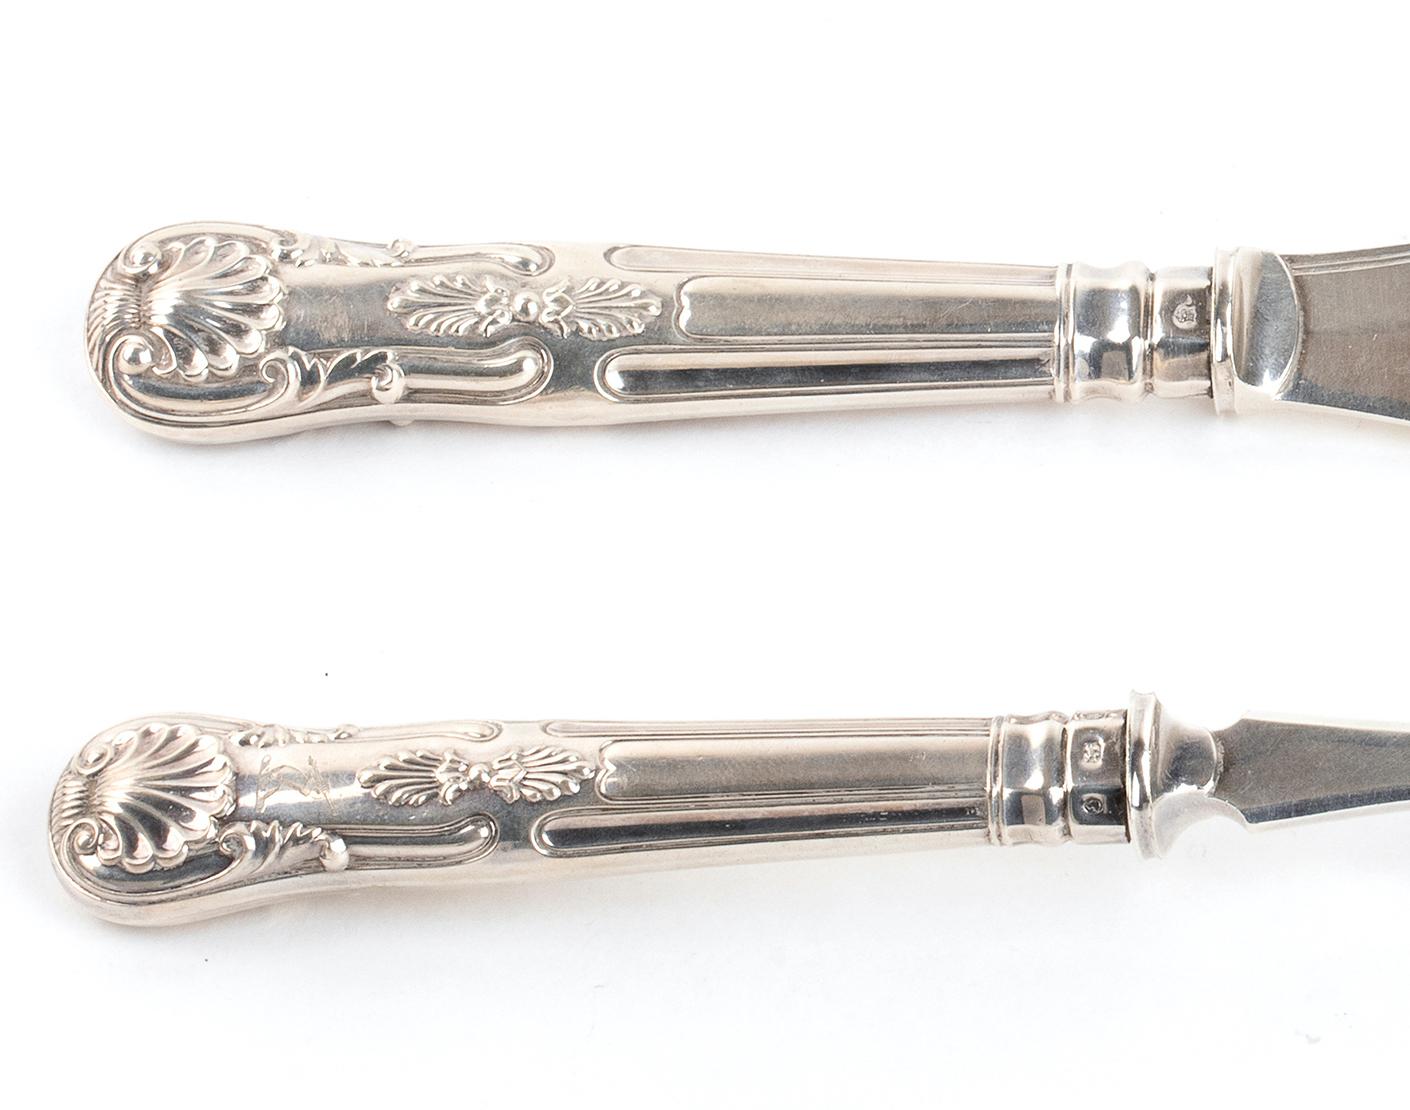 Engraved Refined Pair of Victorian Silverware, by Martin Hall & Co., 1854-1863